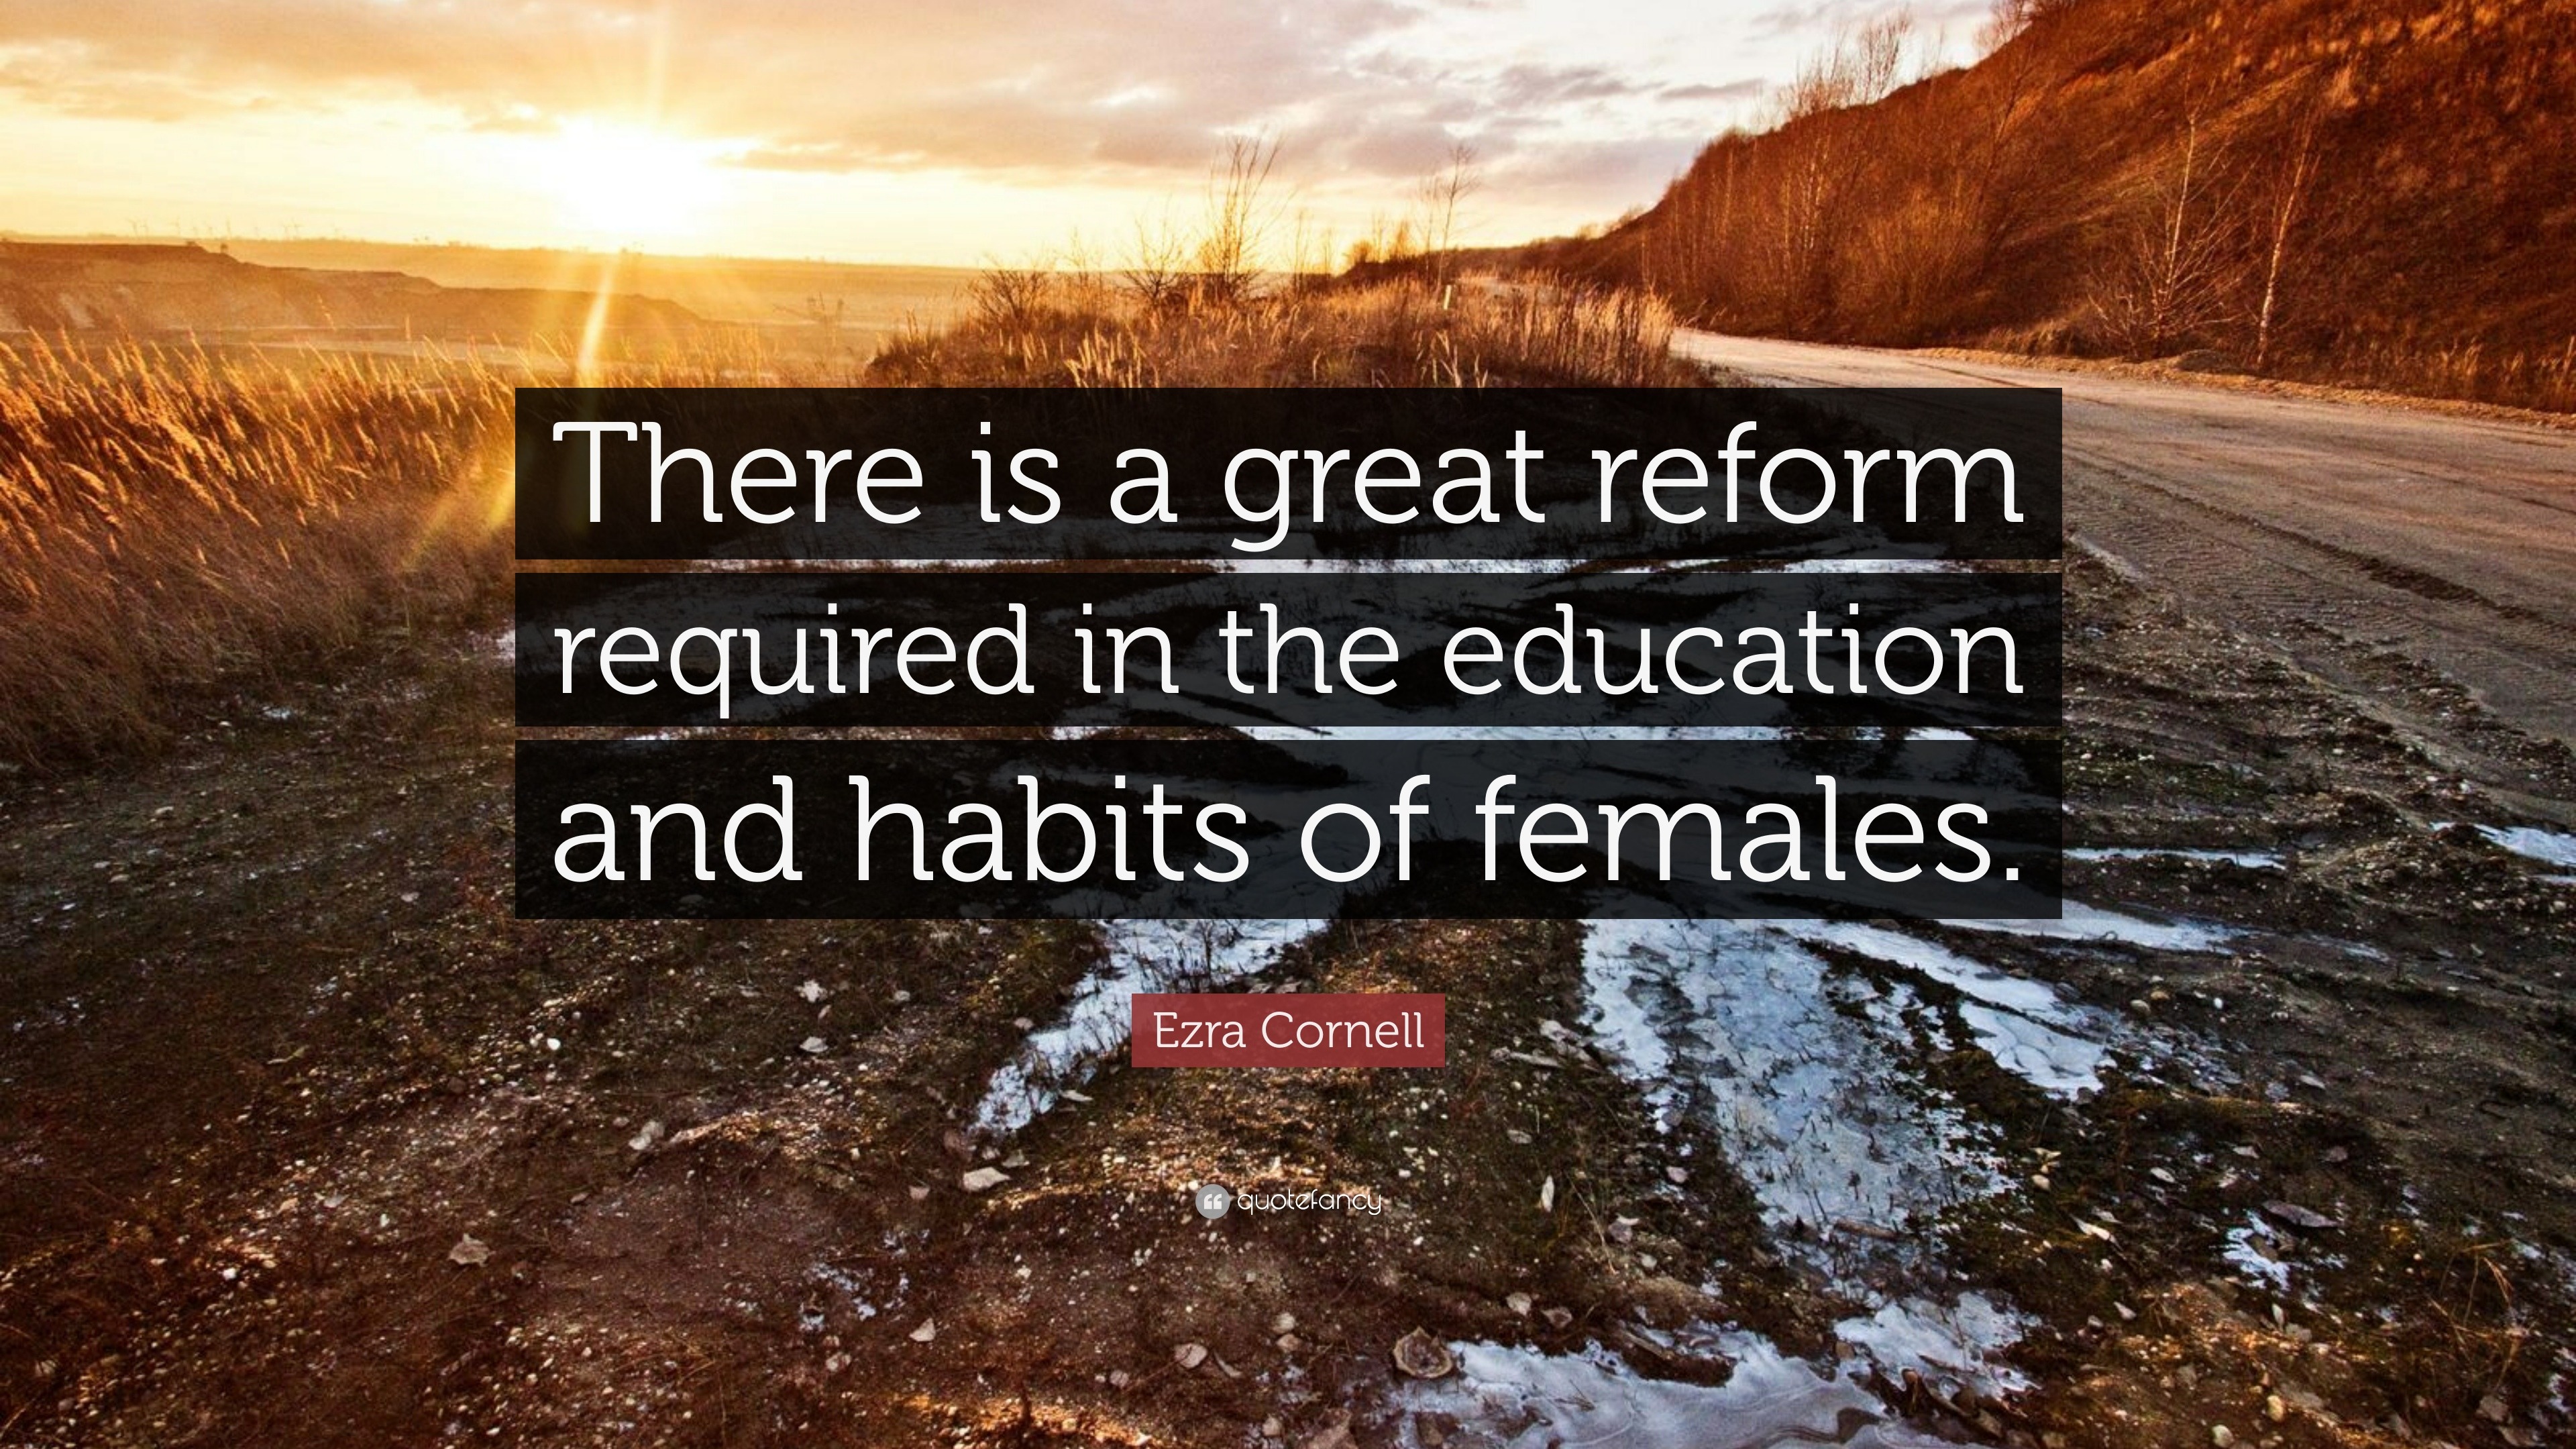 Ezra Cornell Quote: “There is a great reform required in the education